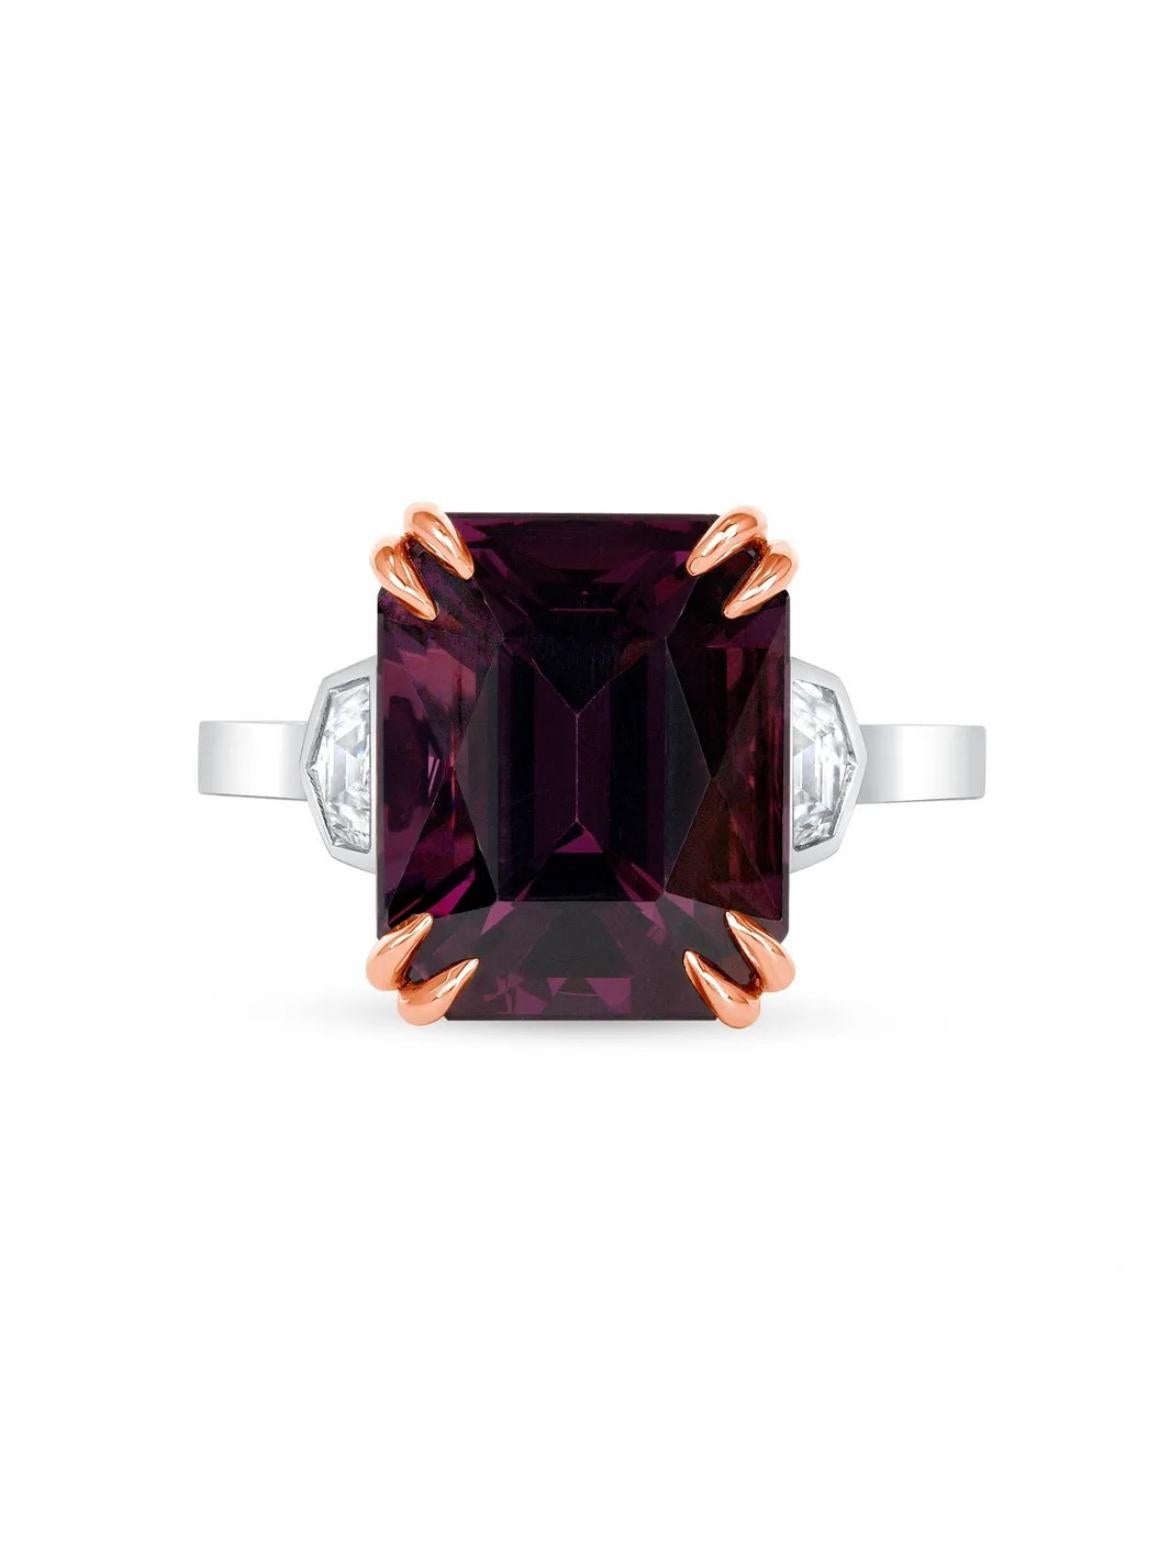 Emerald Cut 7.39ct untreated emerald-cut purple Spinel ring. GIA certified.  For Sale